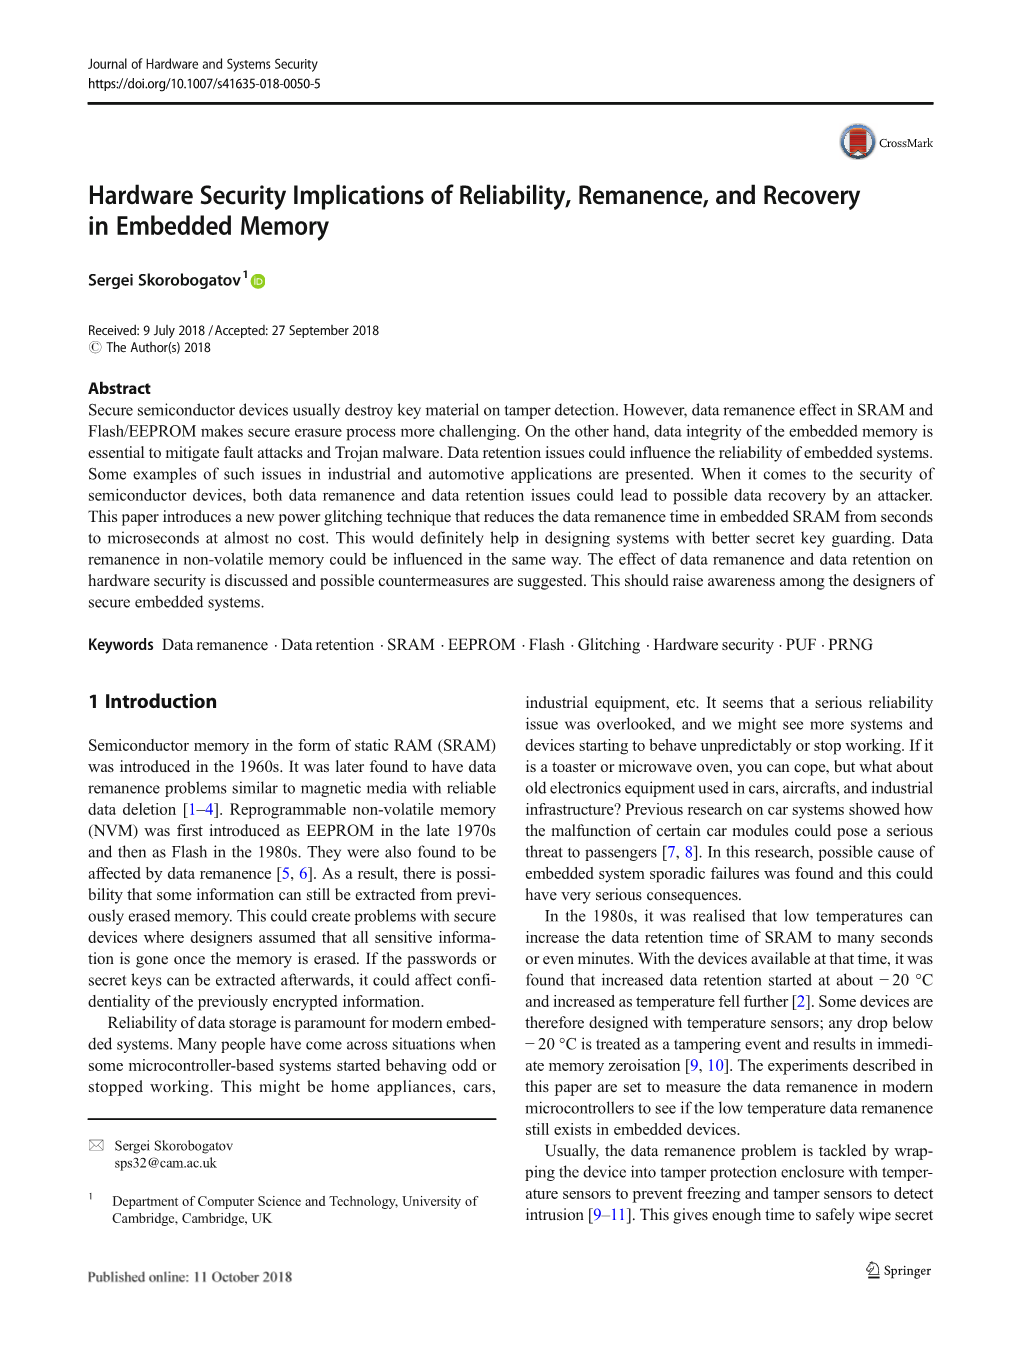 Hardware Security Implications of Reliability, Remanence, and Recovery in Embedded Memory